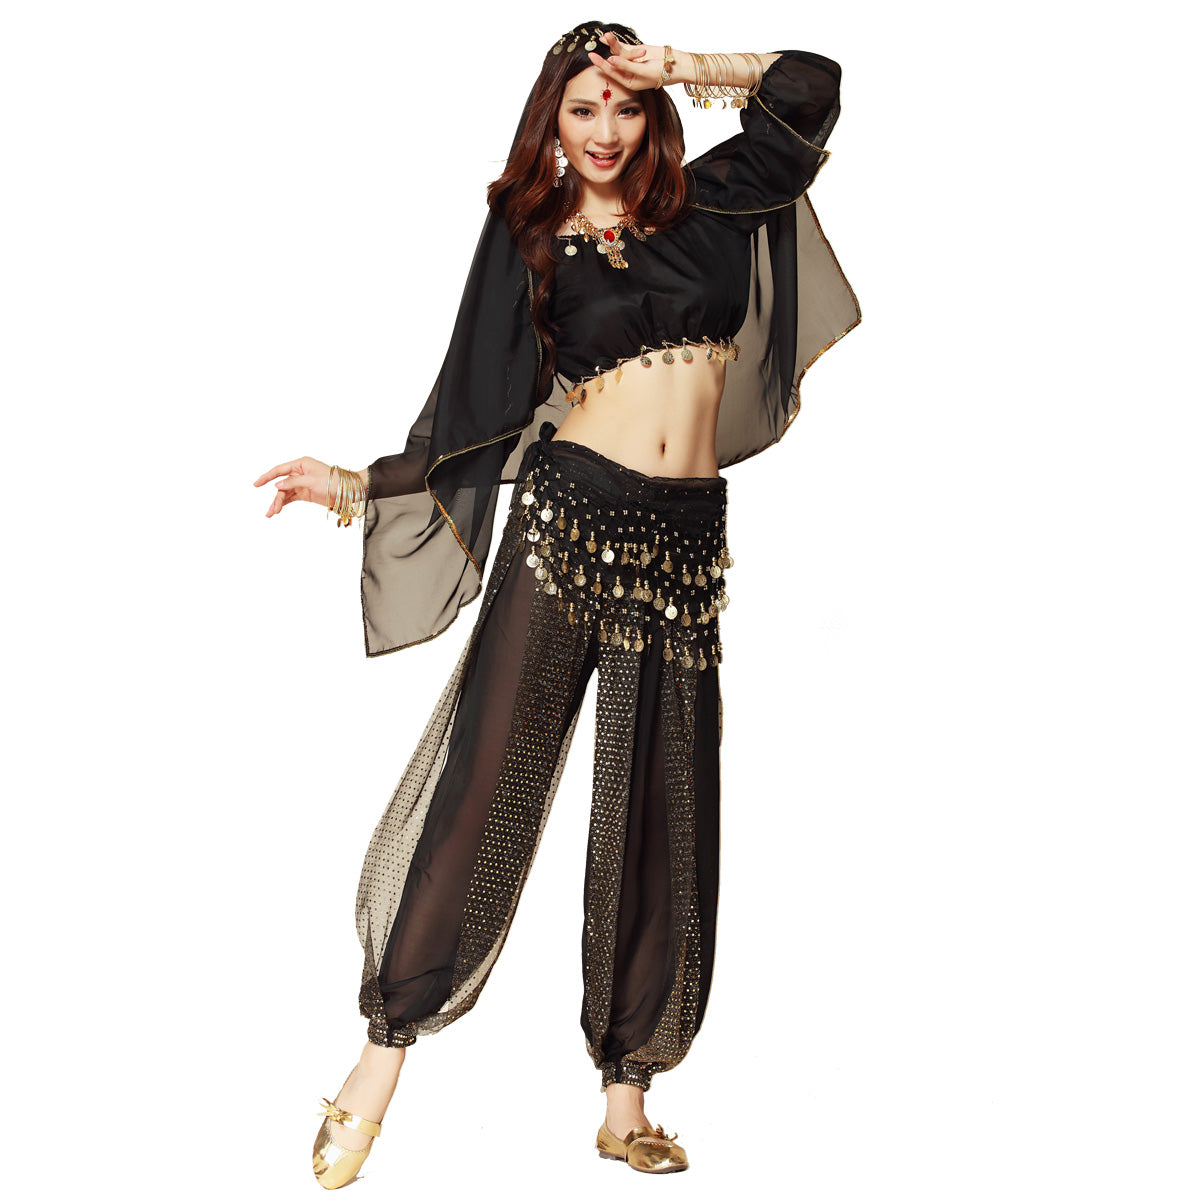 Belly Dance Practice Costume Set 2018 New Design Long Sleeve Top, Lycra  Pants And Shirt, And Coin Belt For Perfectly Dancing From Viladancing,  $20.11 | DHgate.Com